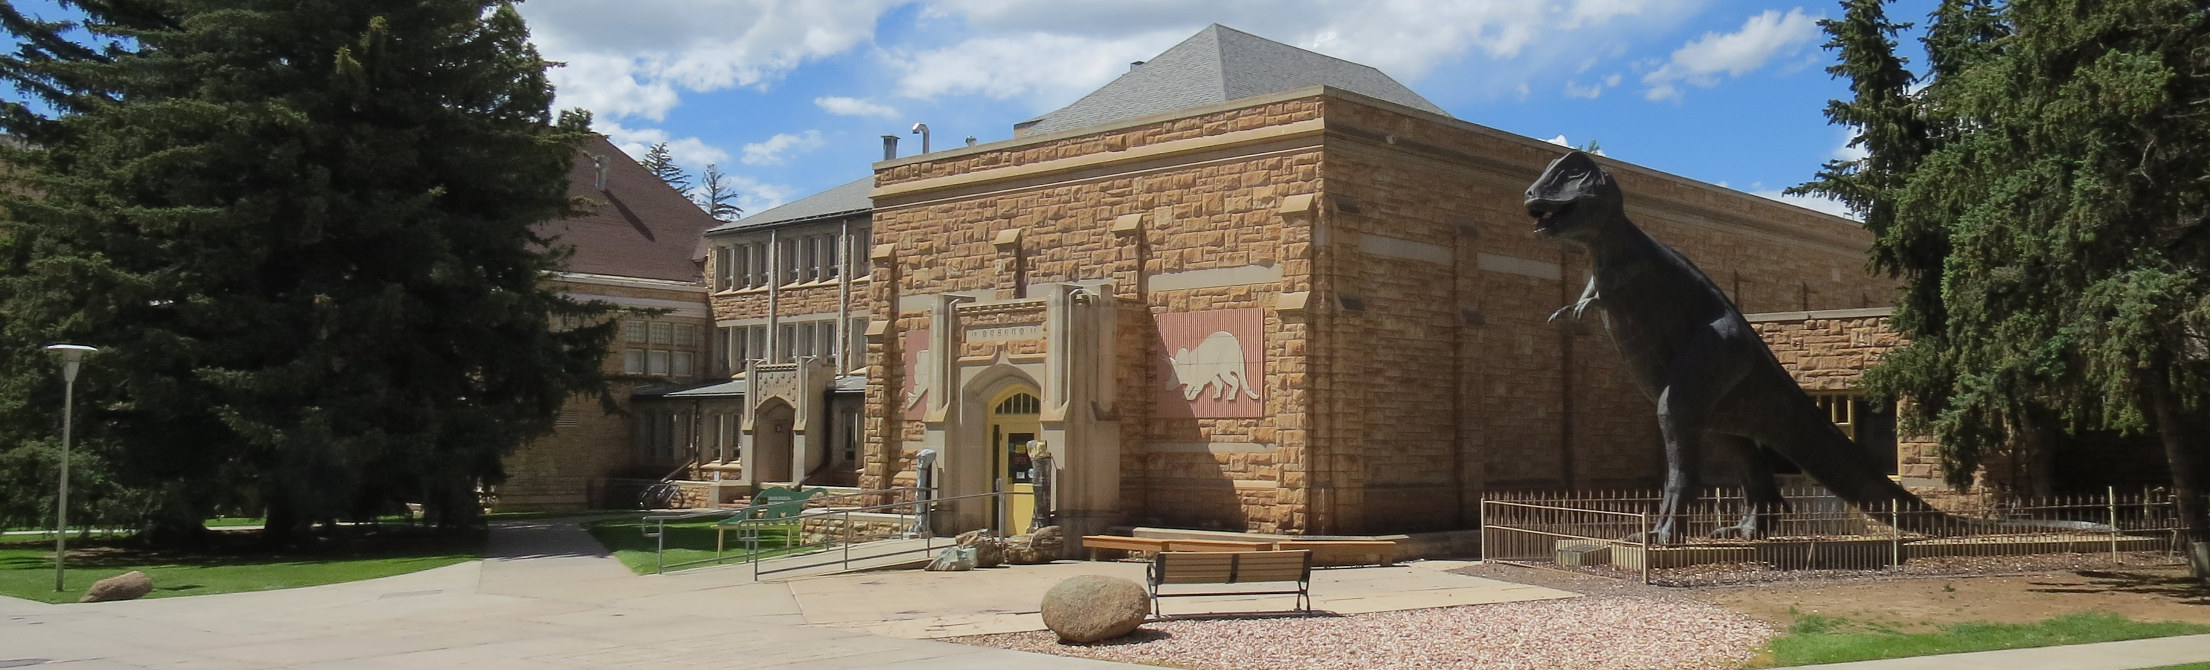 University of Wyoming department of Geology and Geophysics building